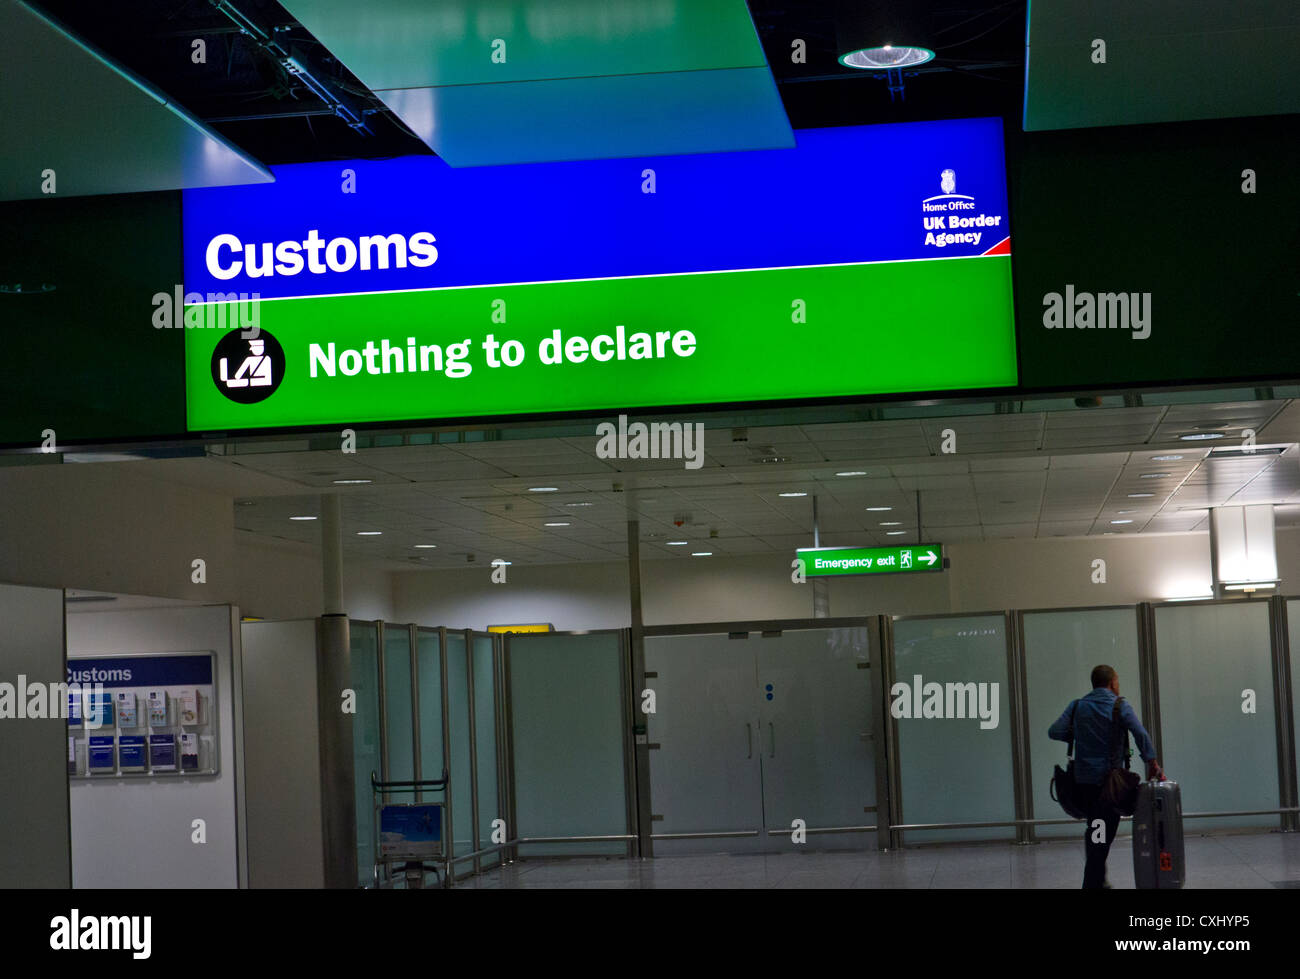 CUSTOMS & EXCISE UK Green Channel 'nothing to declare' & scrutiny security passenger UK Border Agency entry point at London Heathrow Airport UK Stock Photo